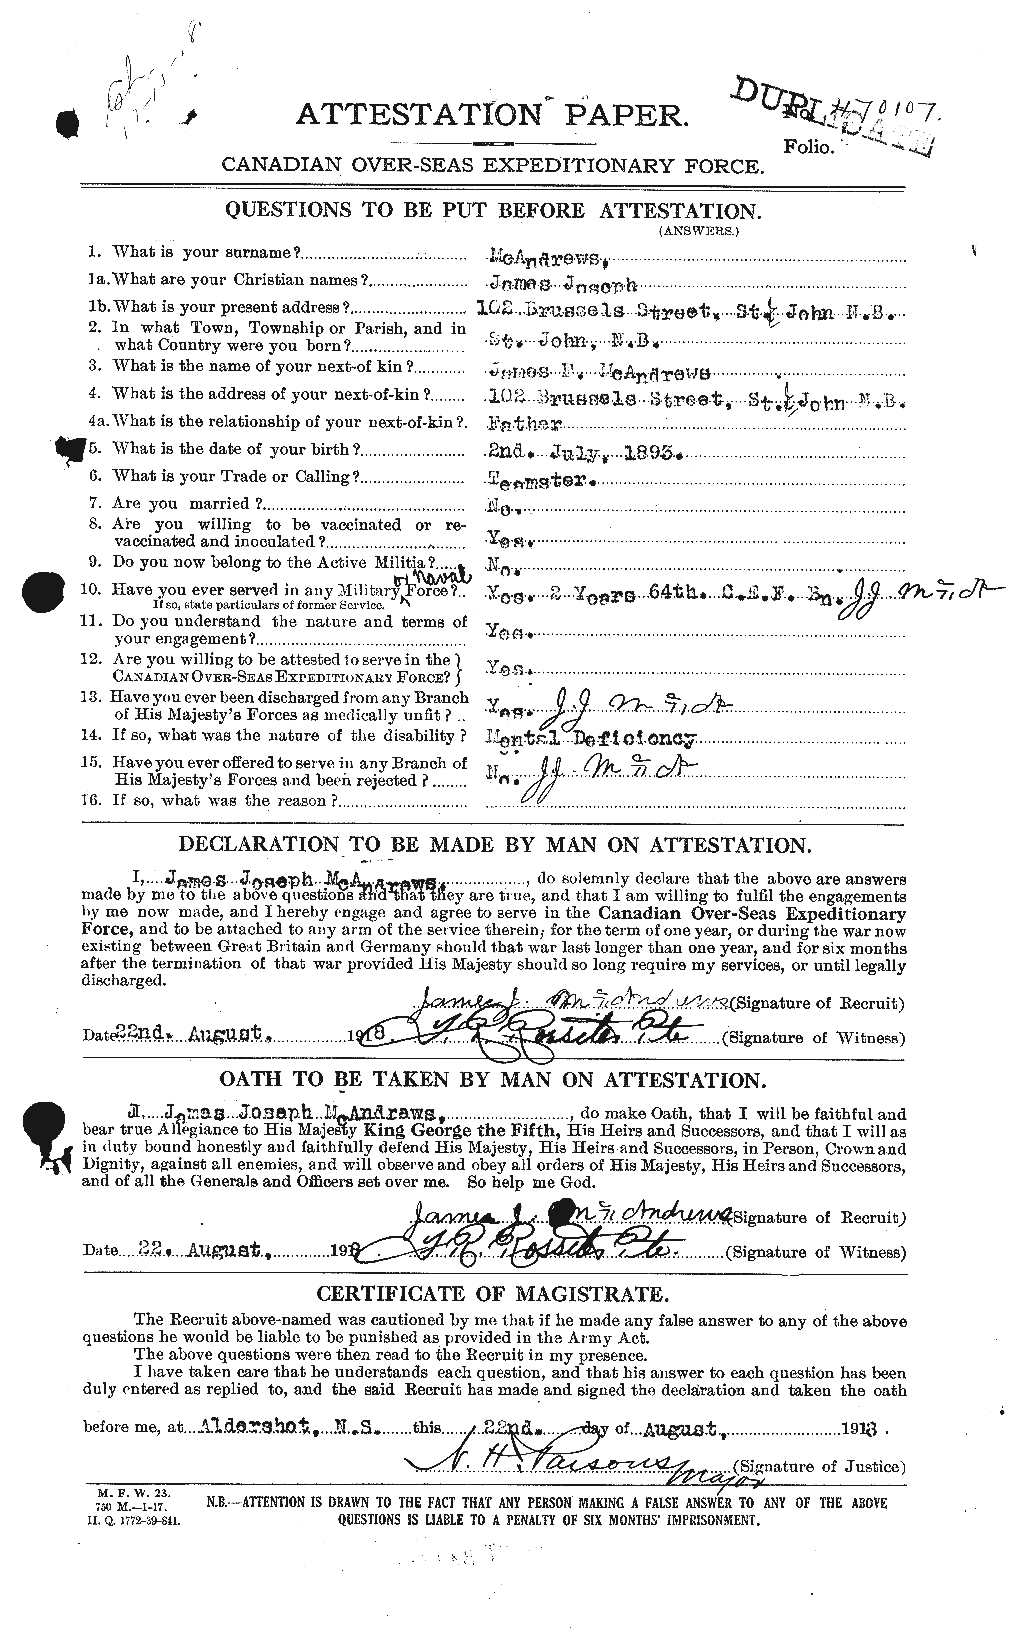 Personnel Records of the First World War - CEF 131403a